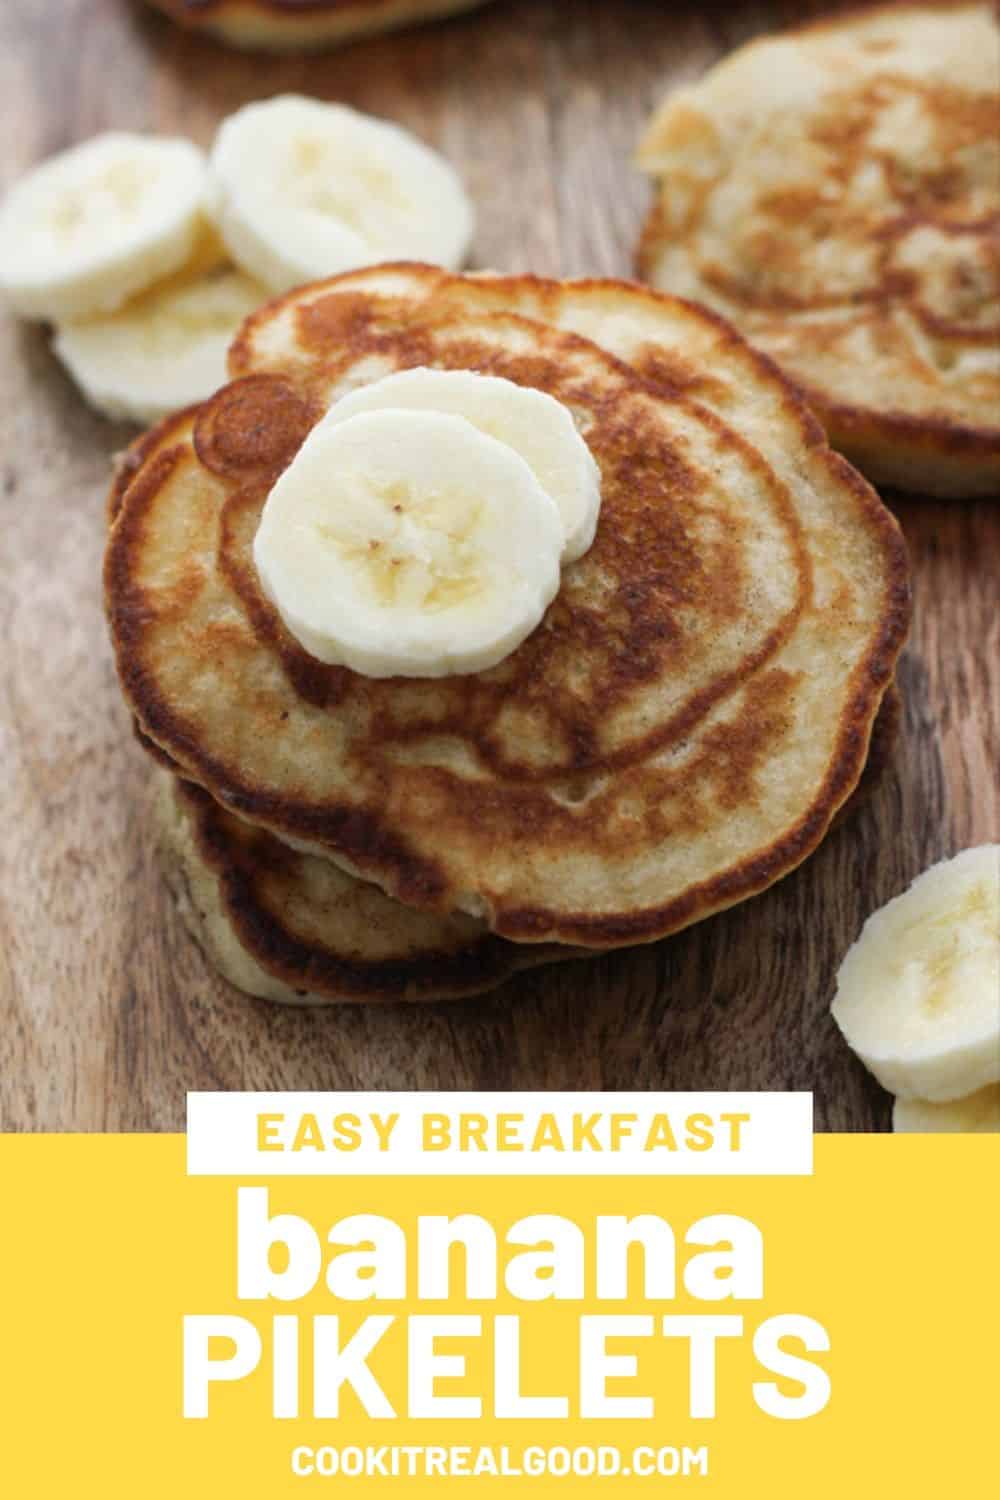 Banana Pikelets - Cook it Real Good